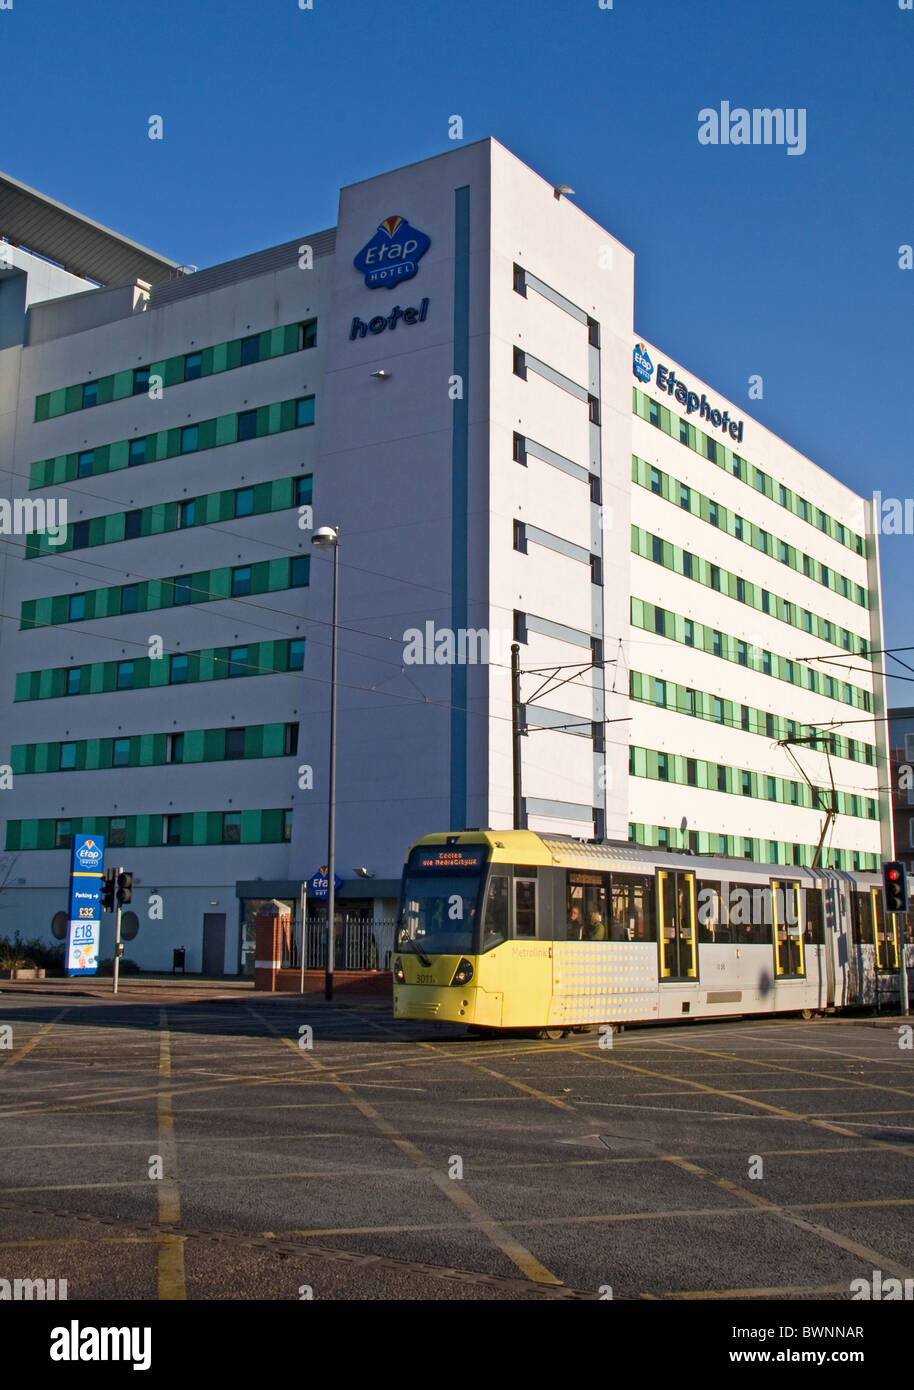 Etap Hotel and Metro tram, Salford Quays , Salford, Greater Manchester, England, UK Stock Photo